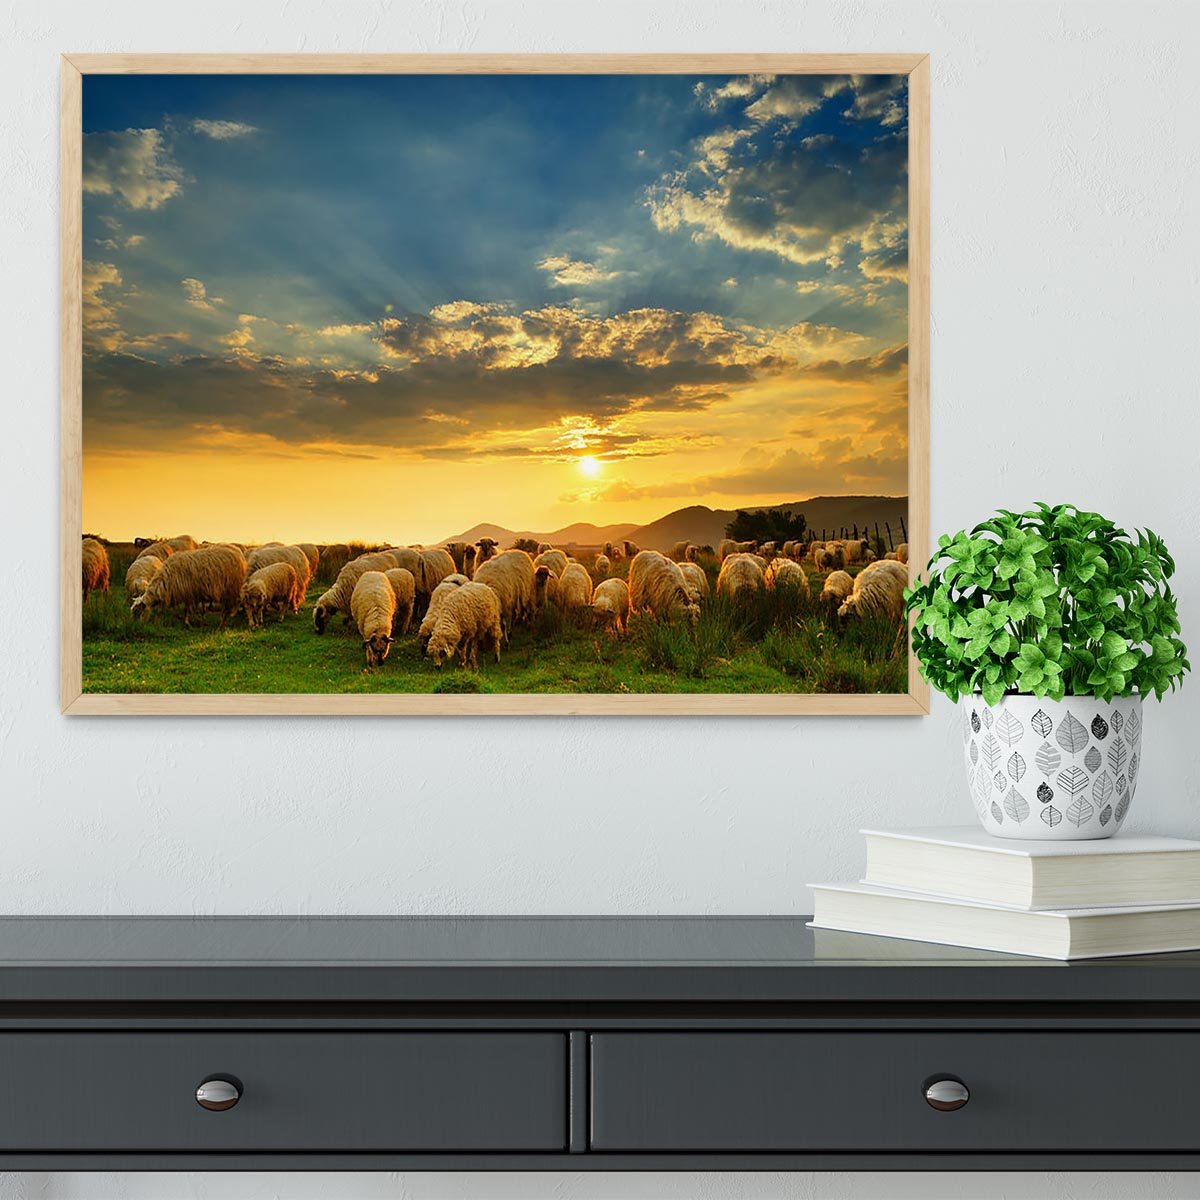 Flock of sheep grazing in a hill at sunset Framed Print - Canvas Art Rocks - 4